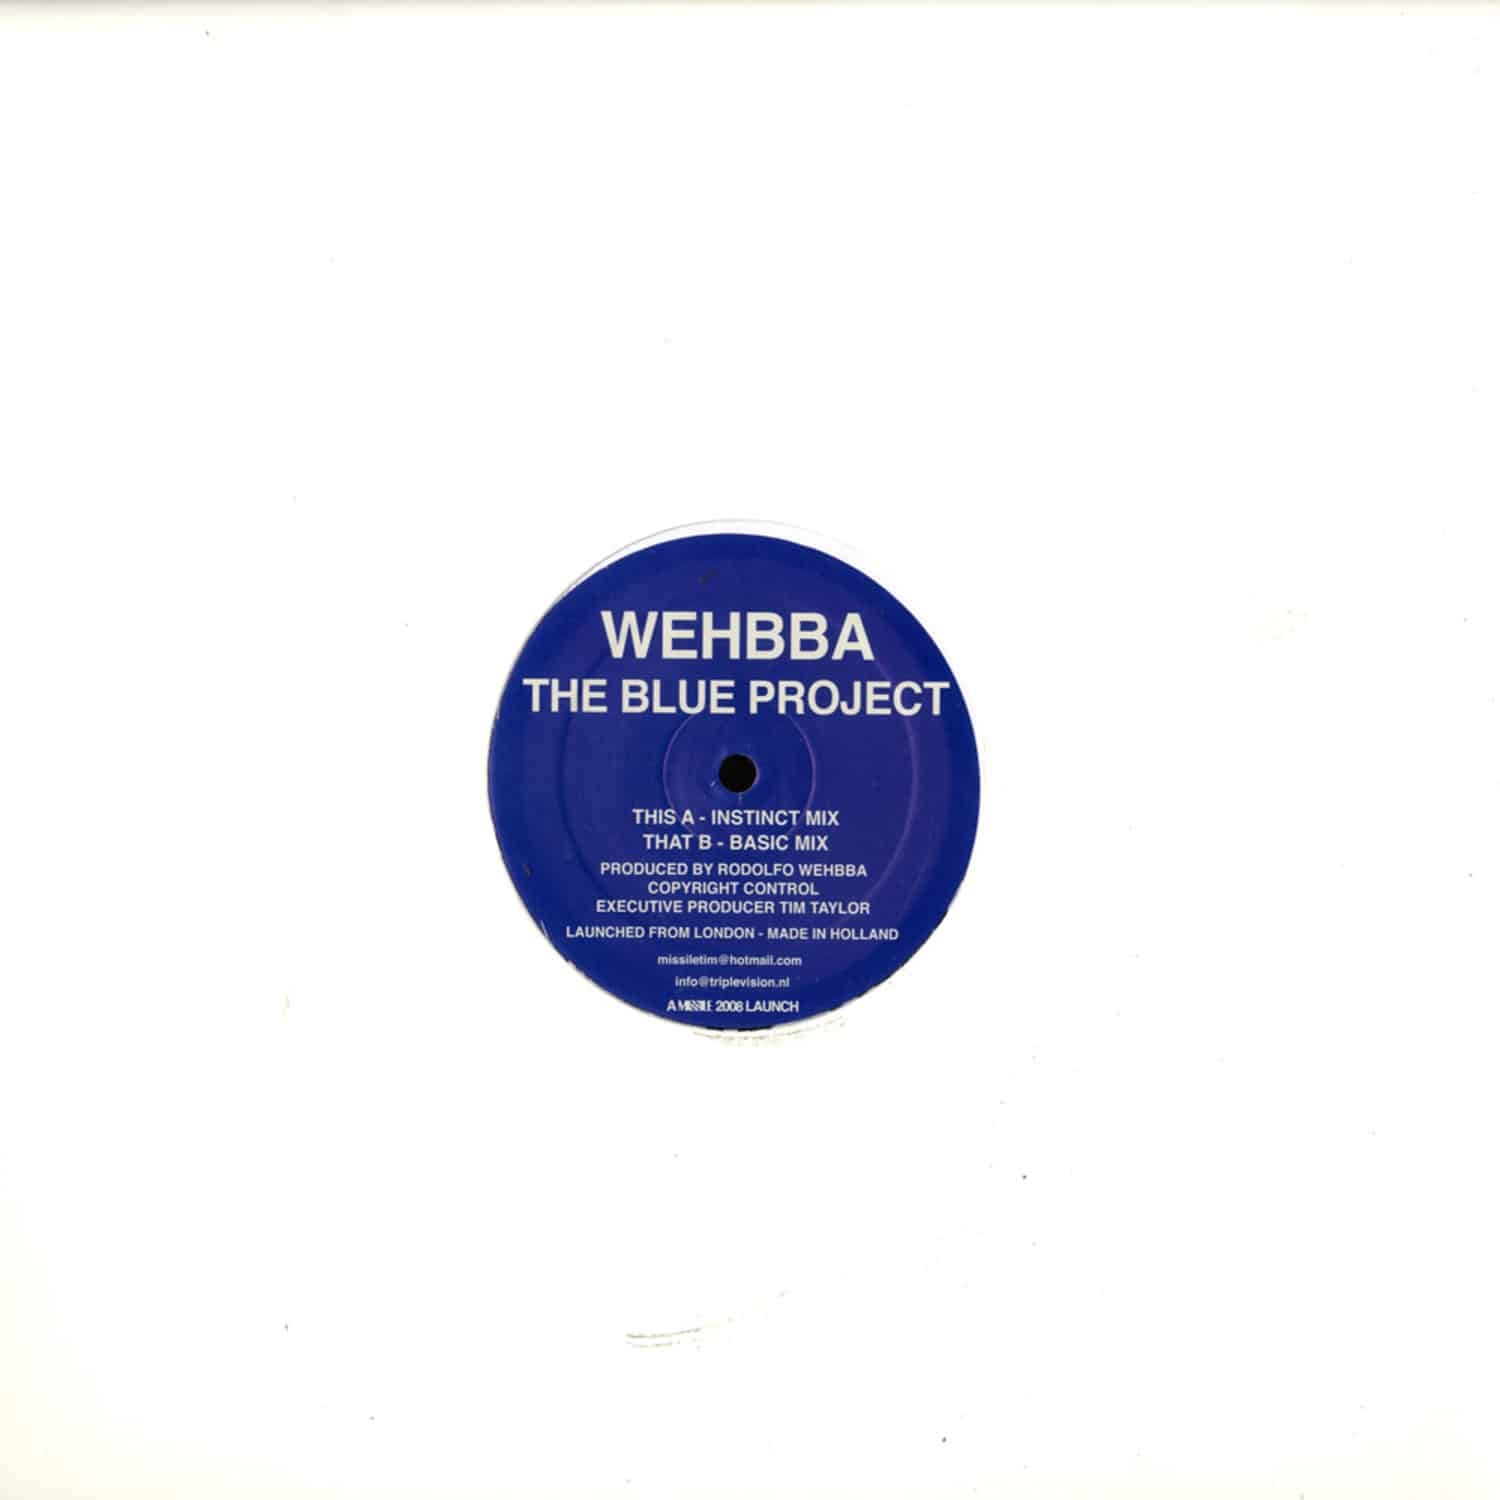 Wehbba - THE BLUE PROJECT